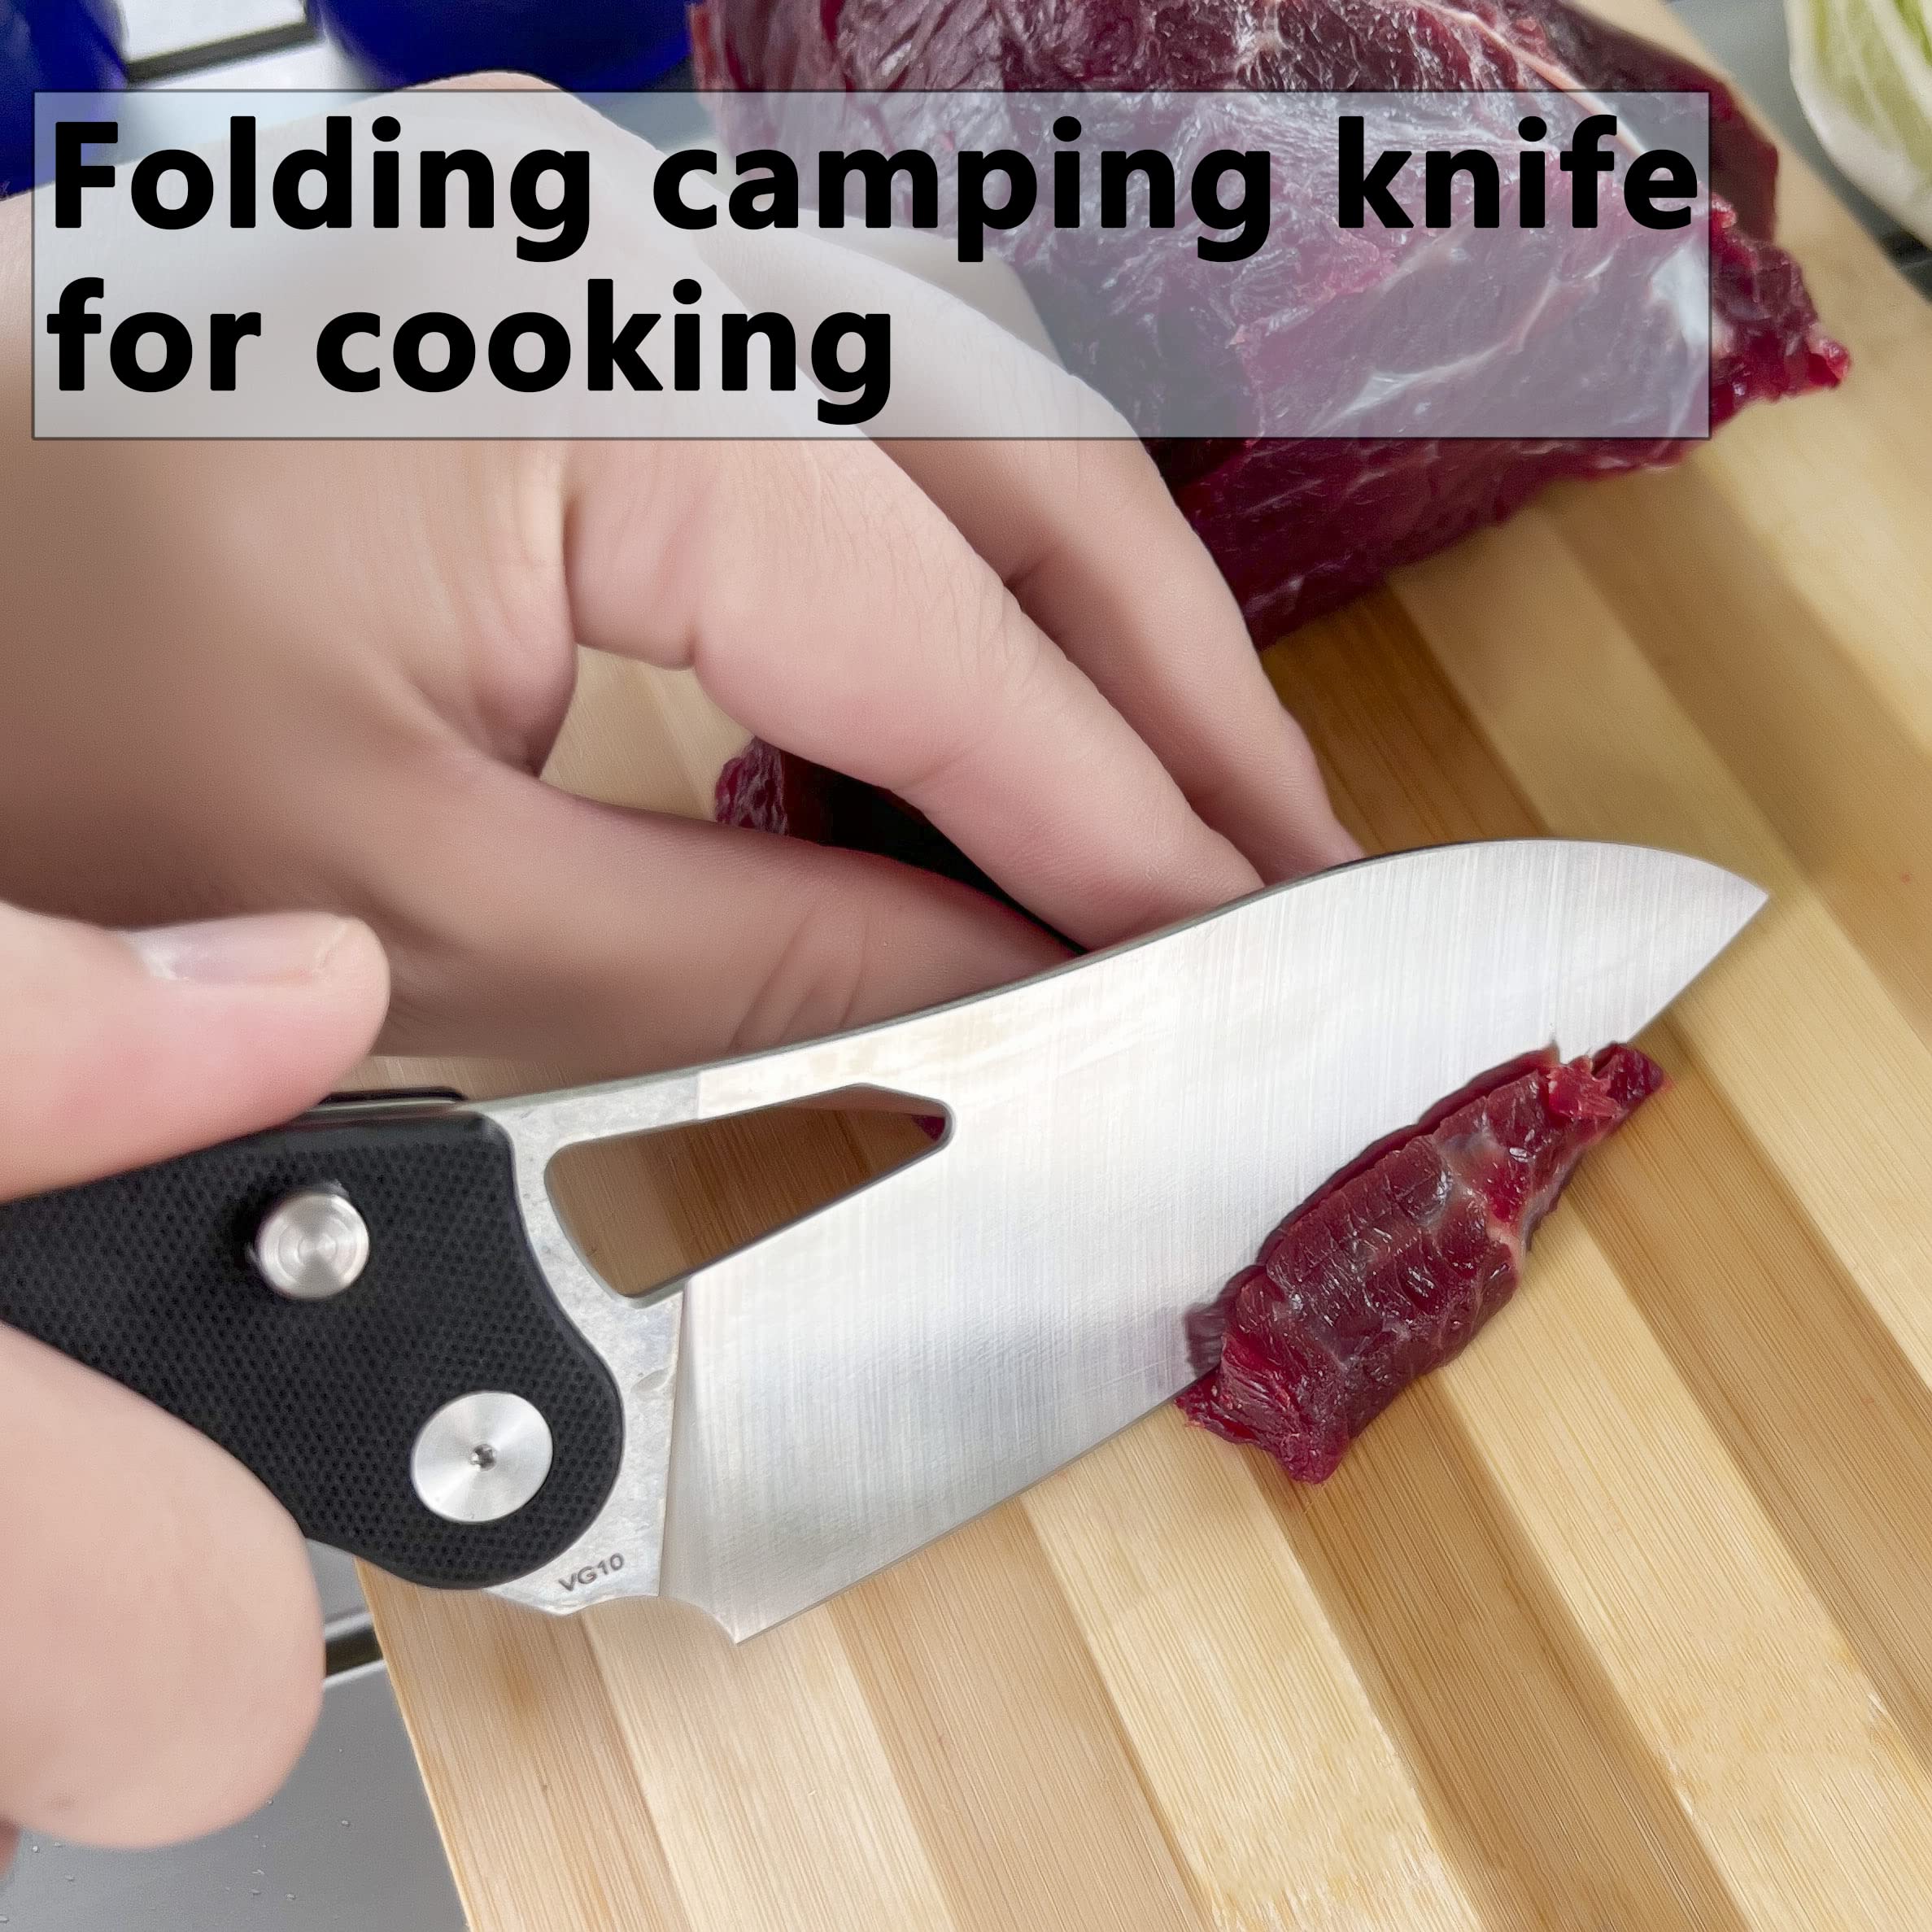 9TiEDC Pocket Folding Chef Knife,VG10 Stainless Steel Ultra sharp Pocket Folding Knife,Folding Camping Knife for Cooking,G10 Handle Camping Trip Outdoor Portable Kitchen Knife(black)